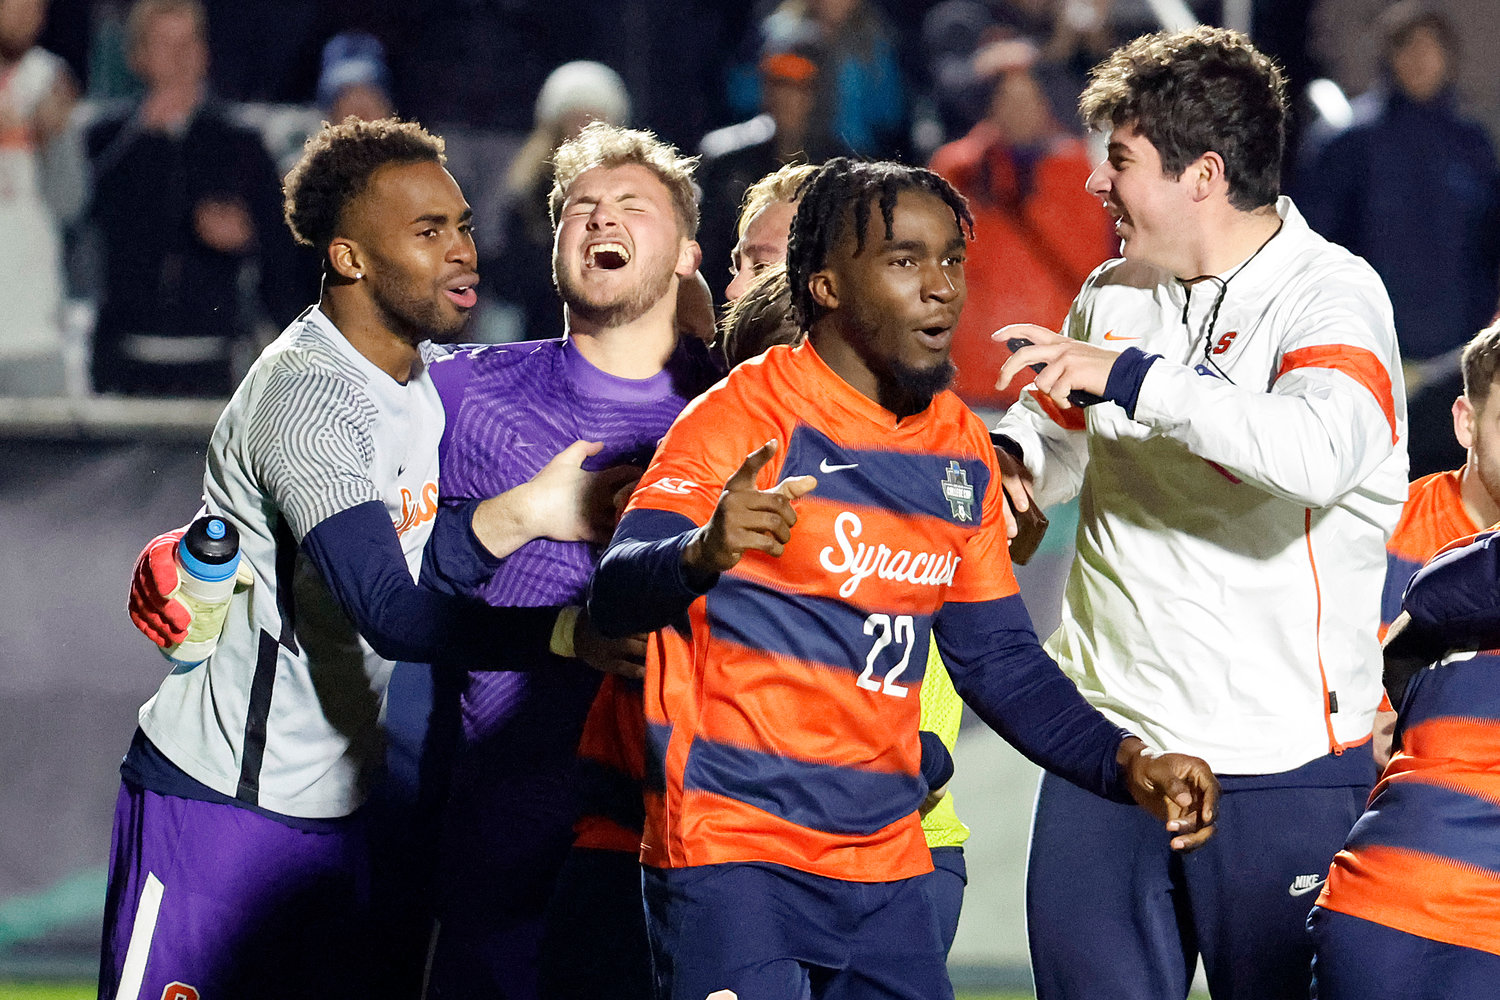 Syracuse players celebrate including goalie Russell Shealy, second from left, after winning the NCAA College Cup championship against Indiana on Monday in Cary, N.C.